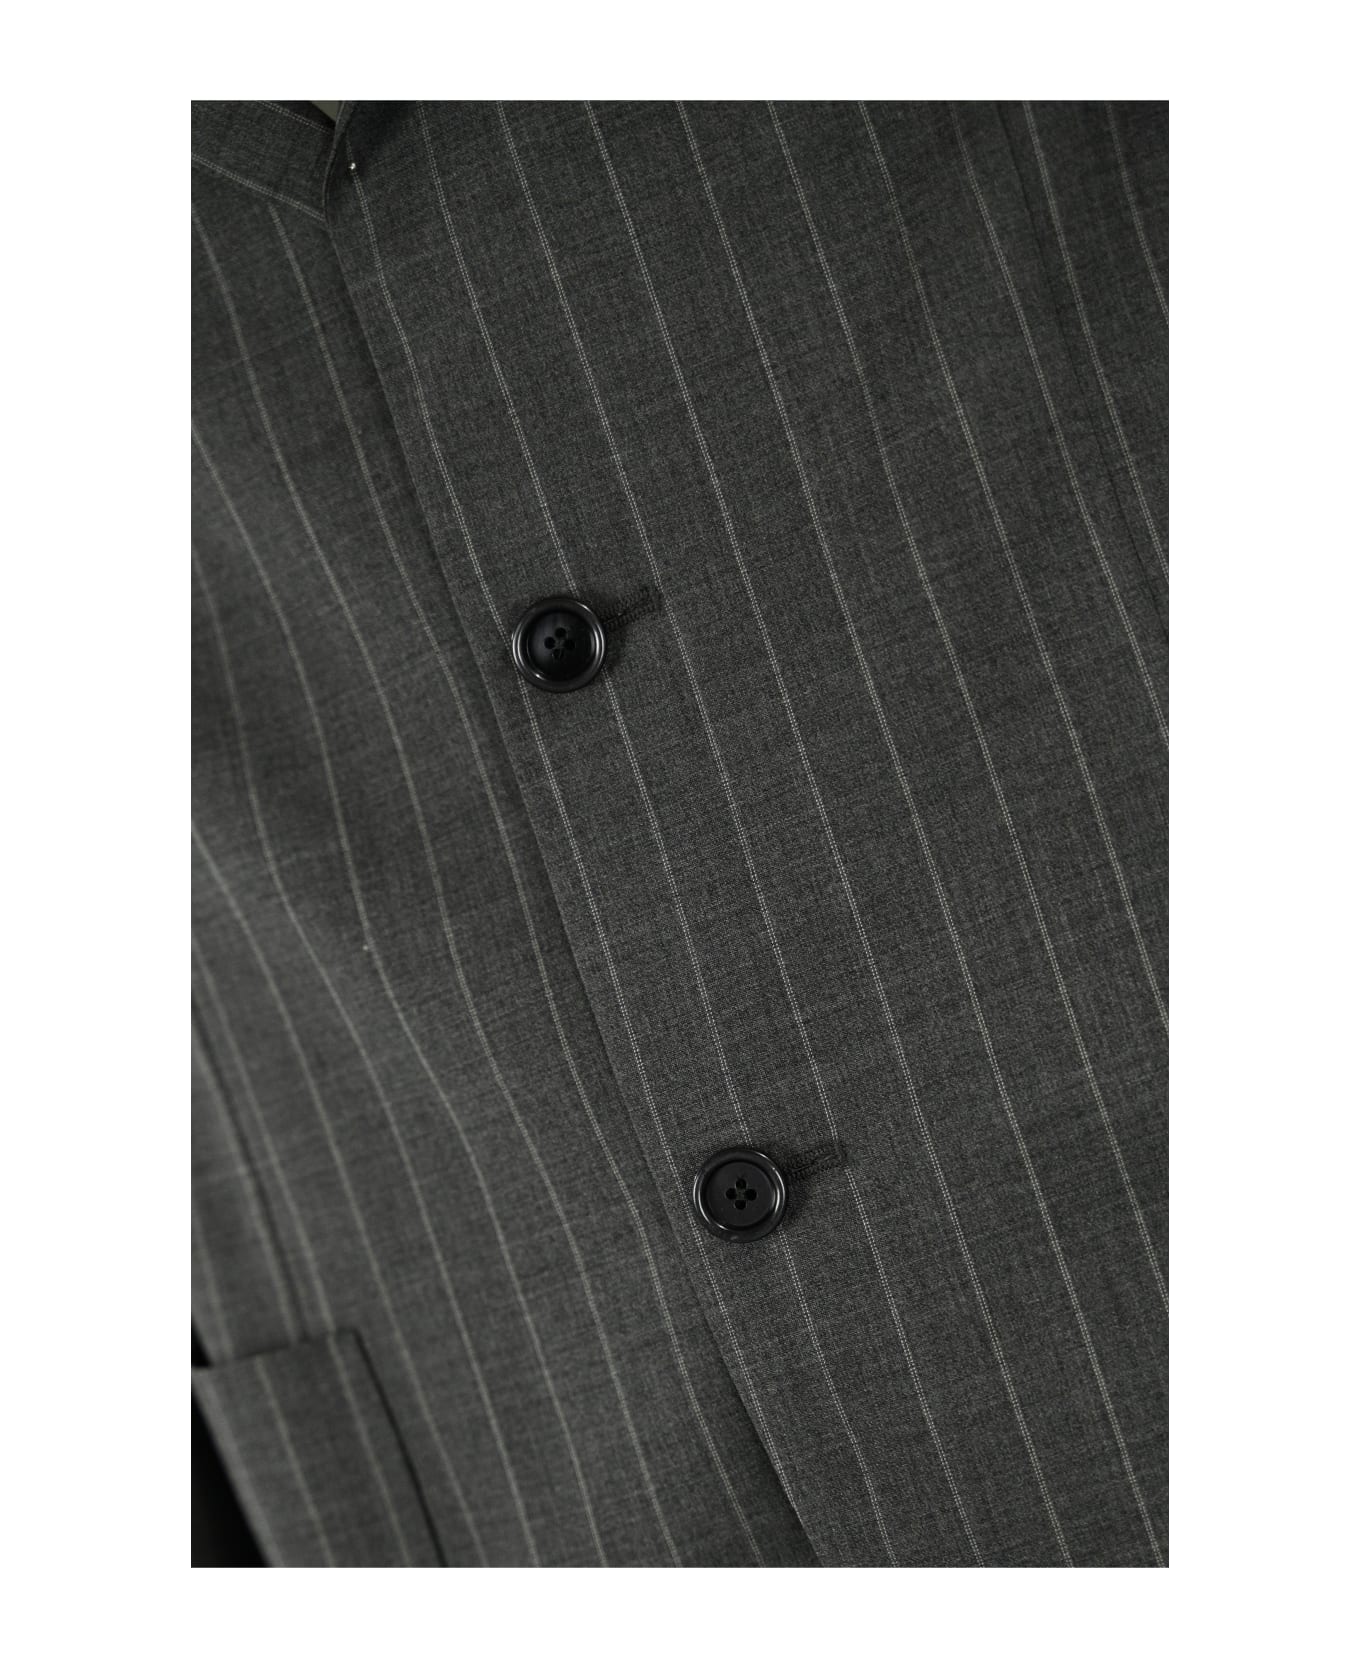 Lardini Pinstriped Suit With Lace-up Trousers - Grigio